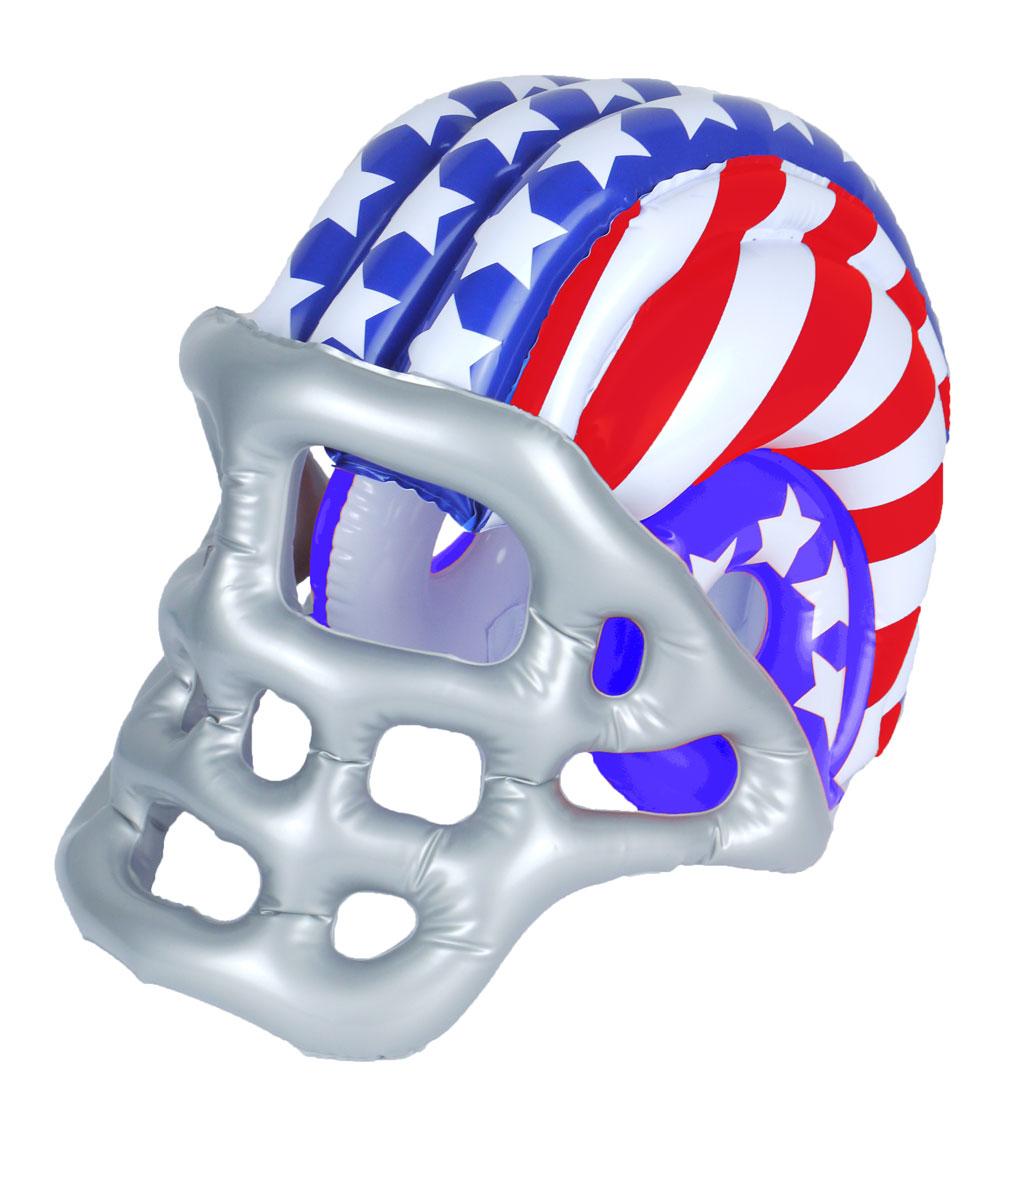 Inflatable American Football Helmet by Henbrandt X99369 available here at Karnival Costumes online party shop